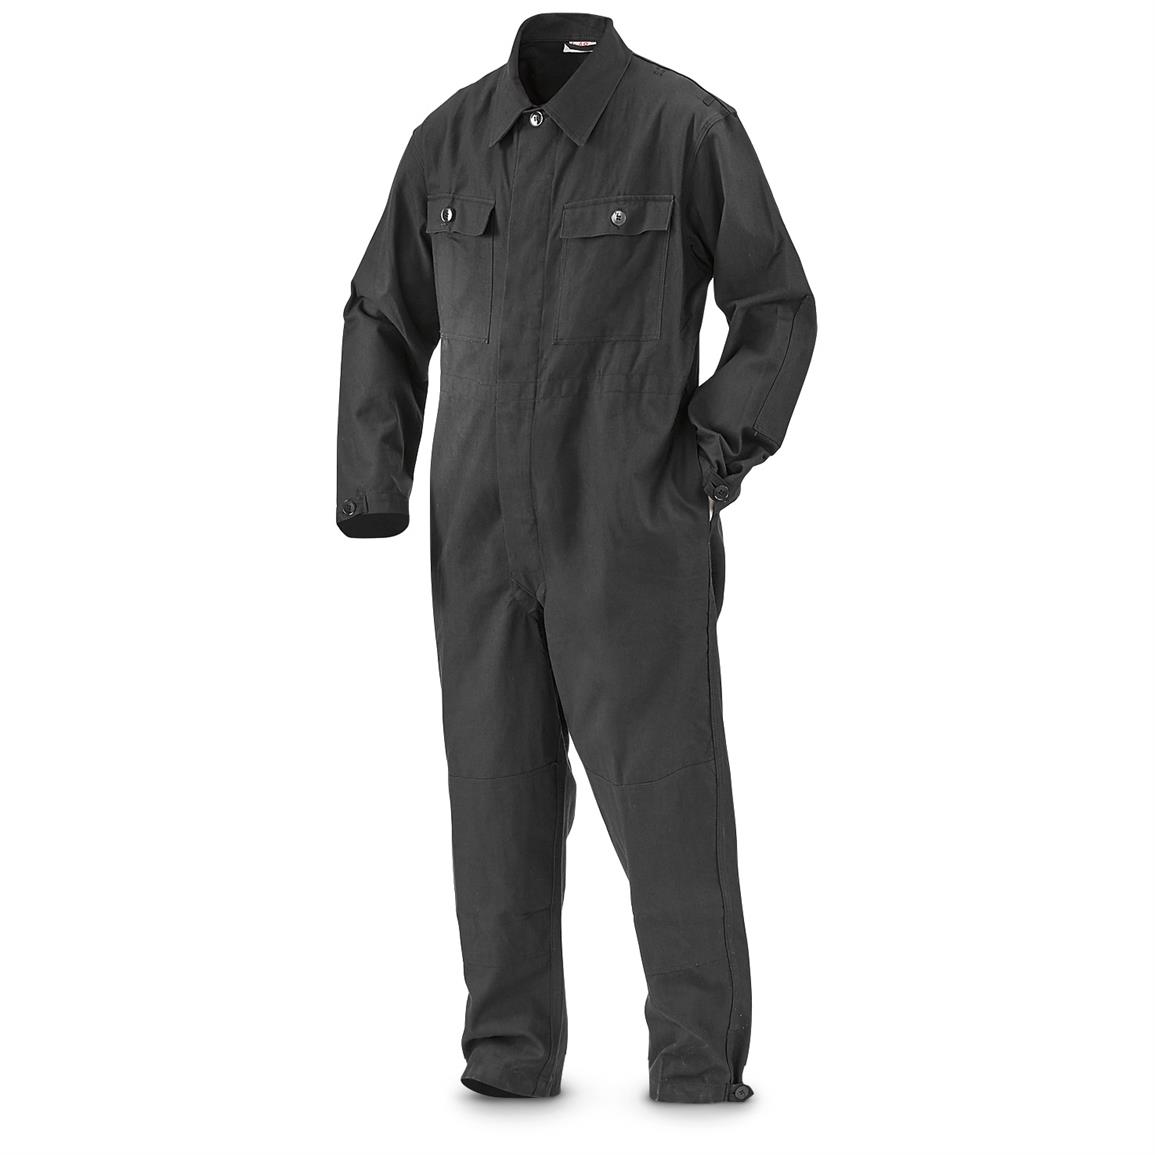 2 Used East German Military Surplus Coveralls - 637623, Overall ...